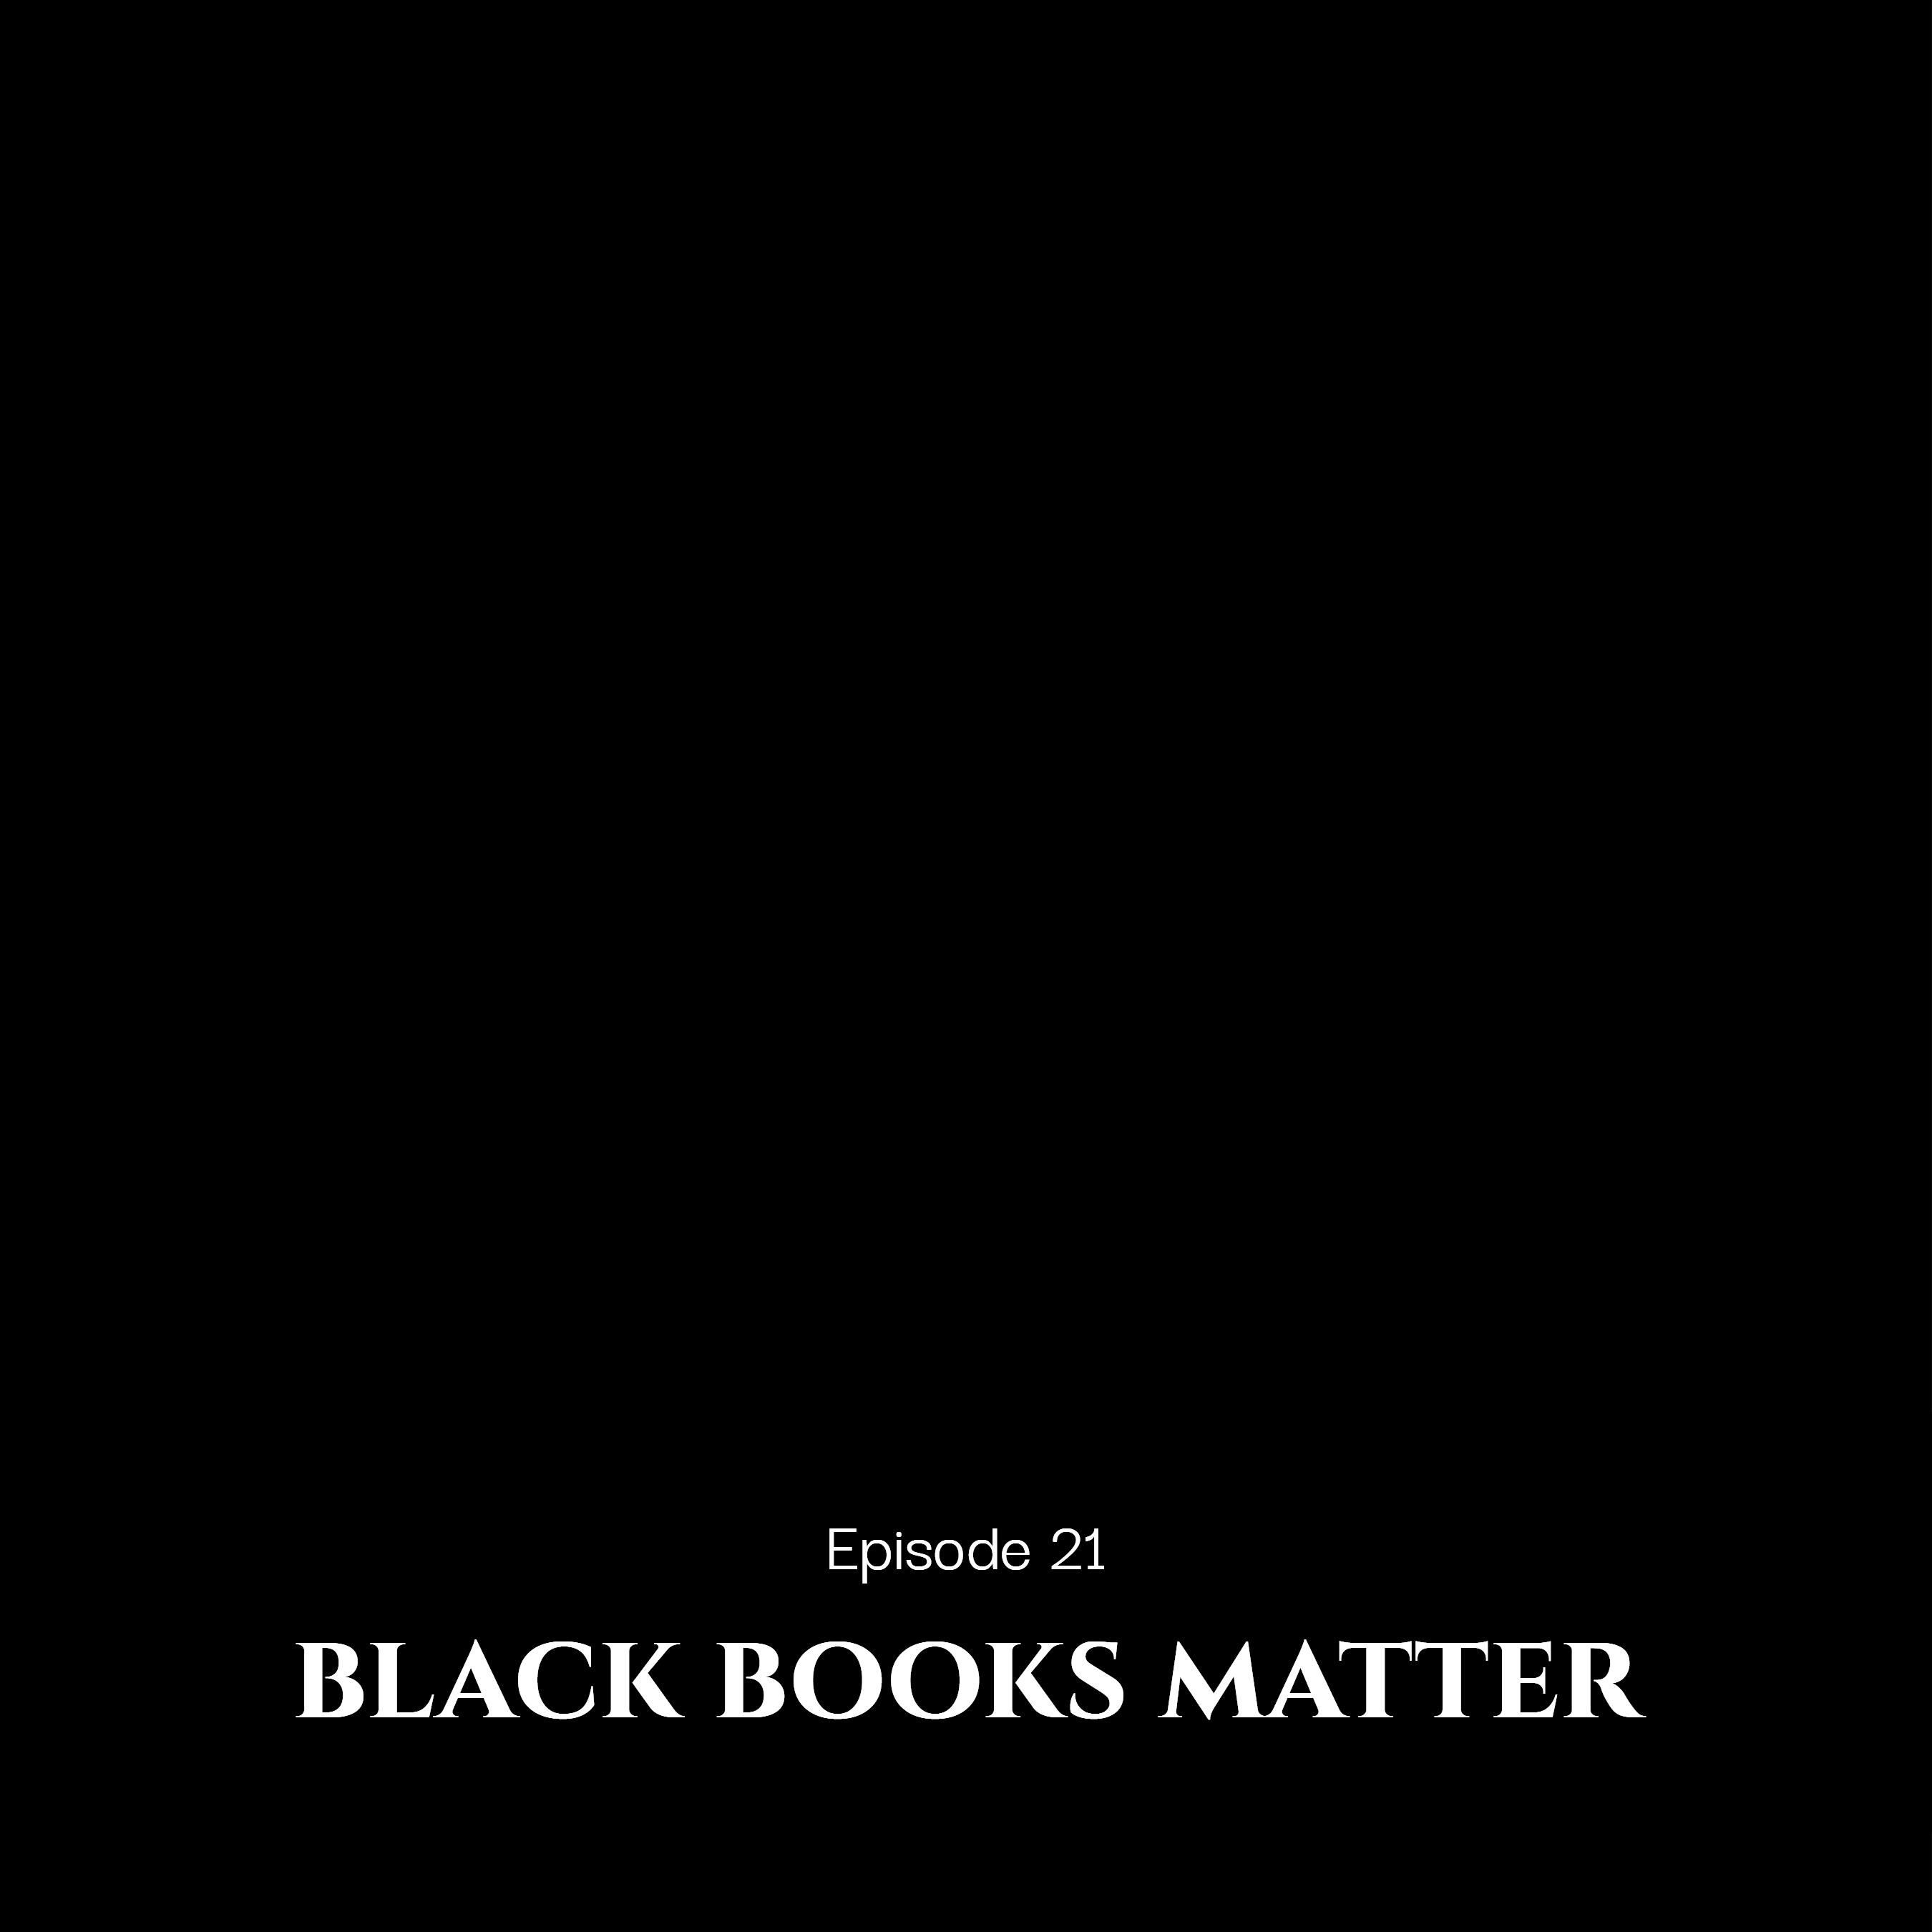 Black stories matter. Write your book.